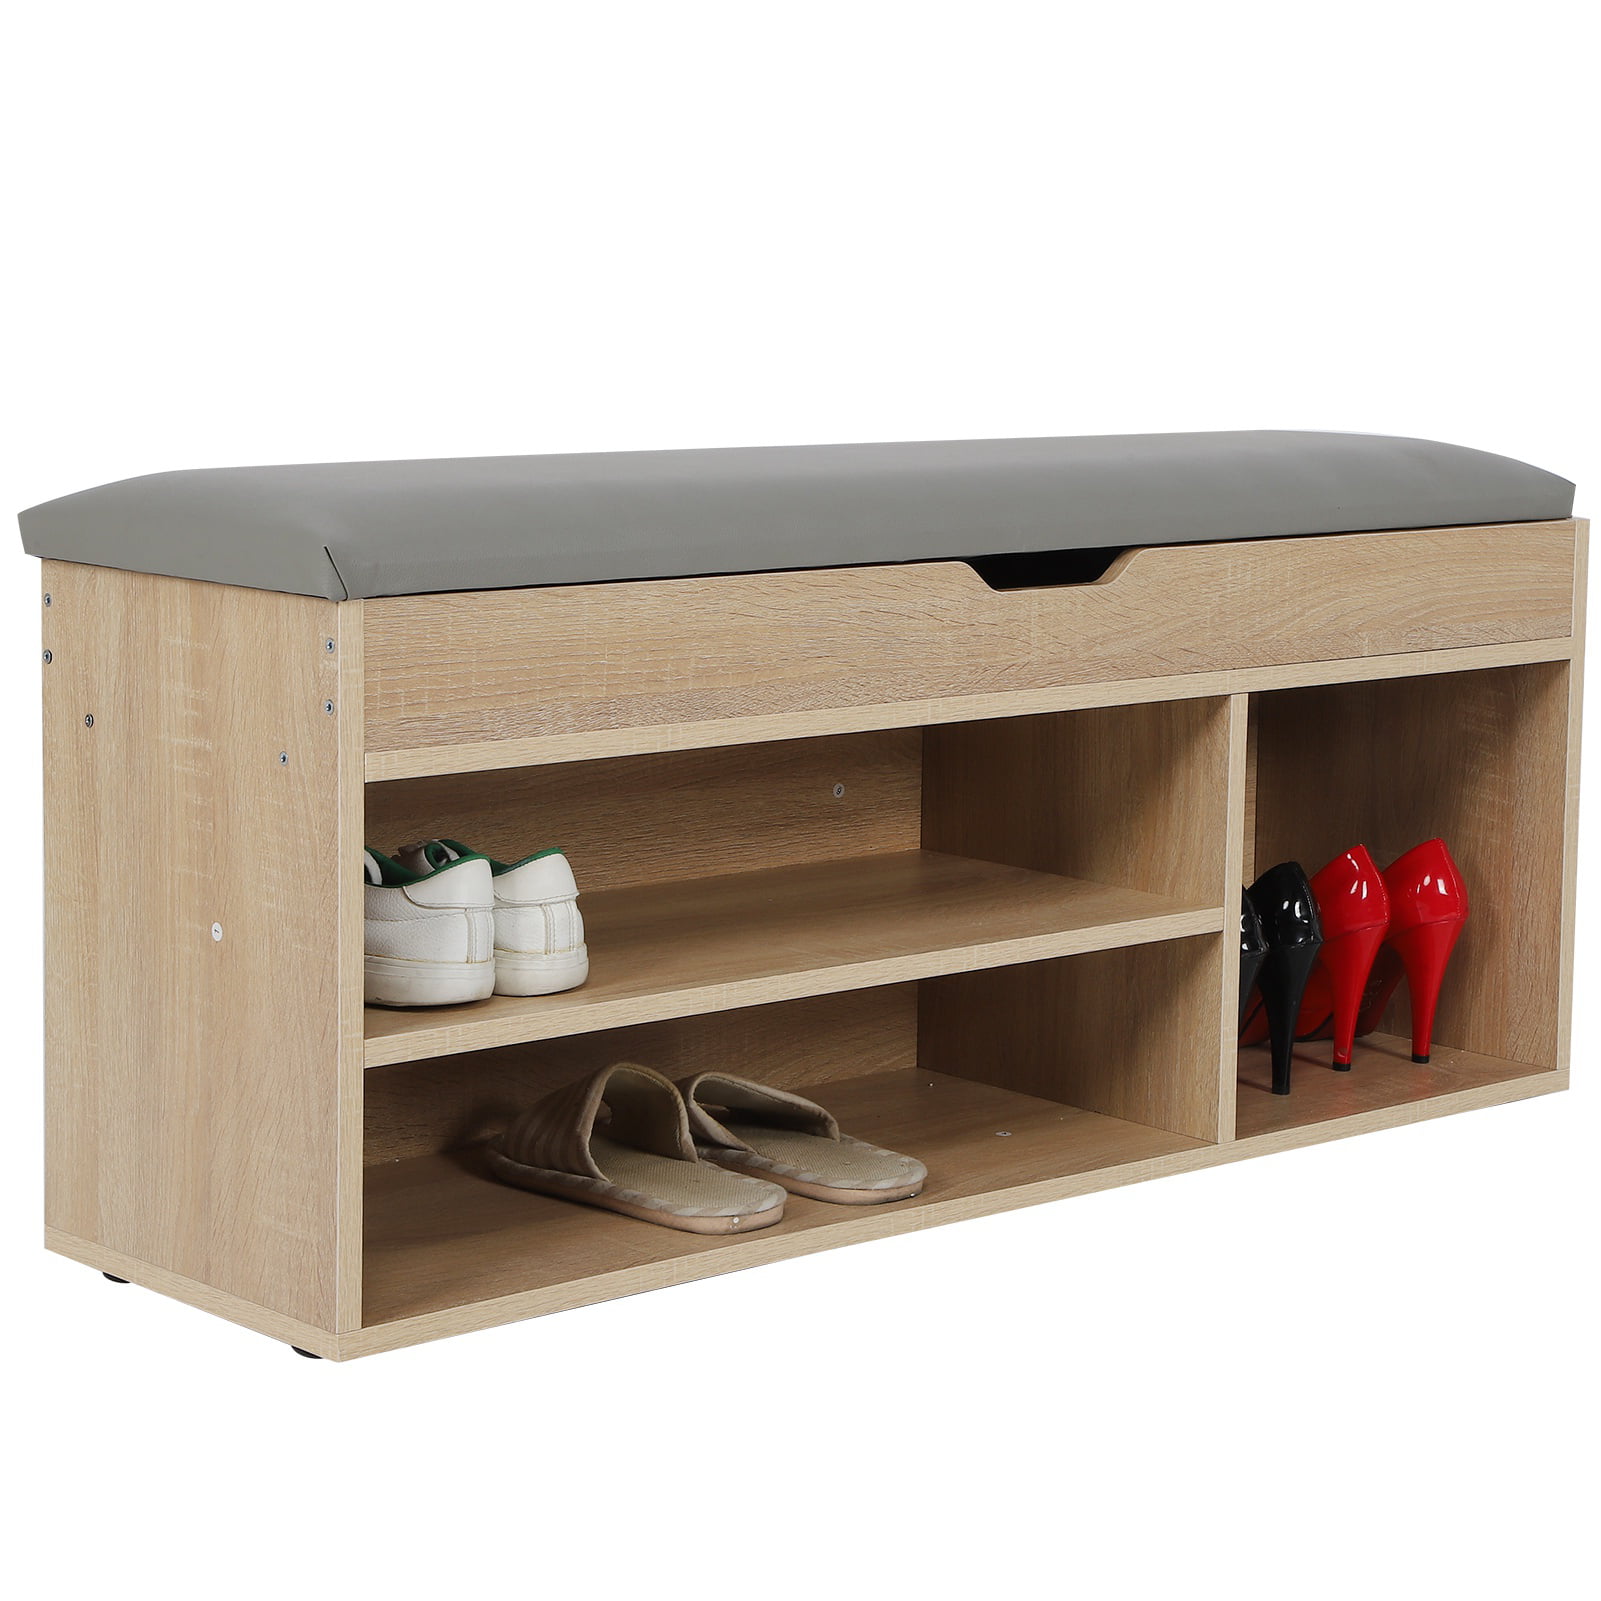 Entryway Hallway Living Room Bedroom, Wooden Shoe Cabinet Storage Bench With Seat Cushion